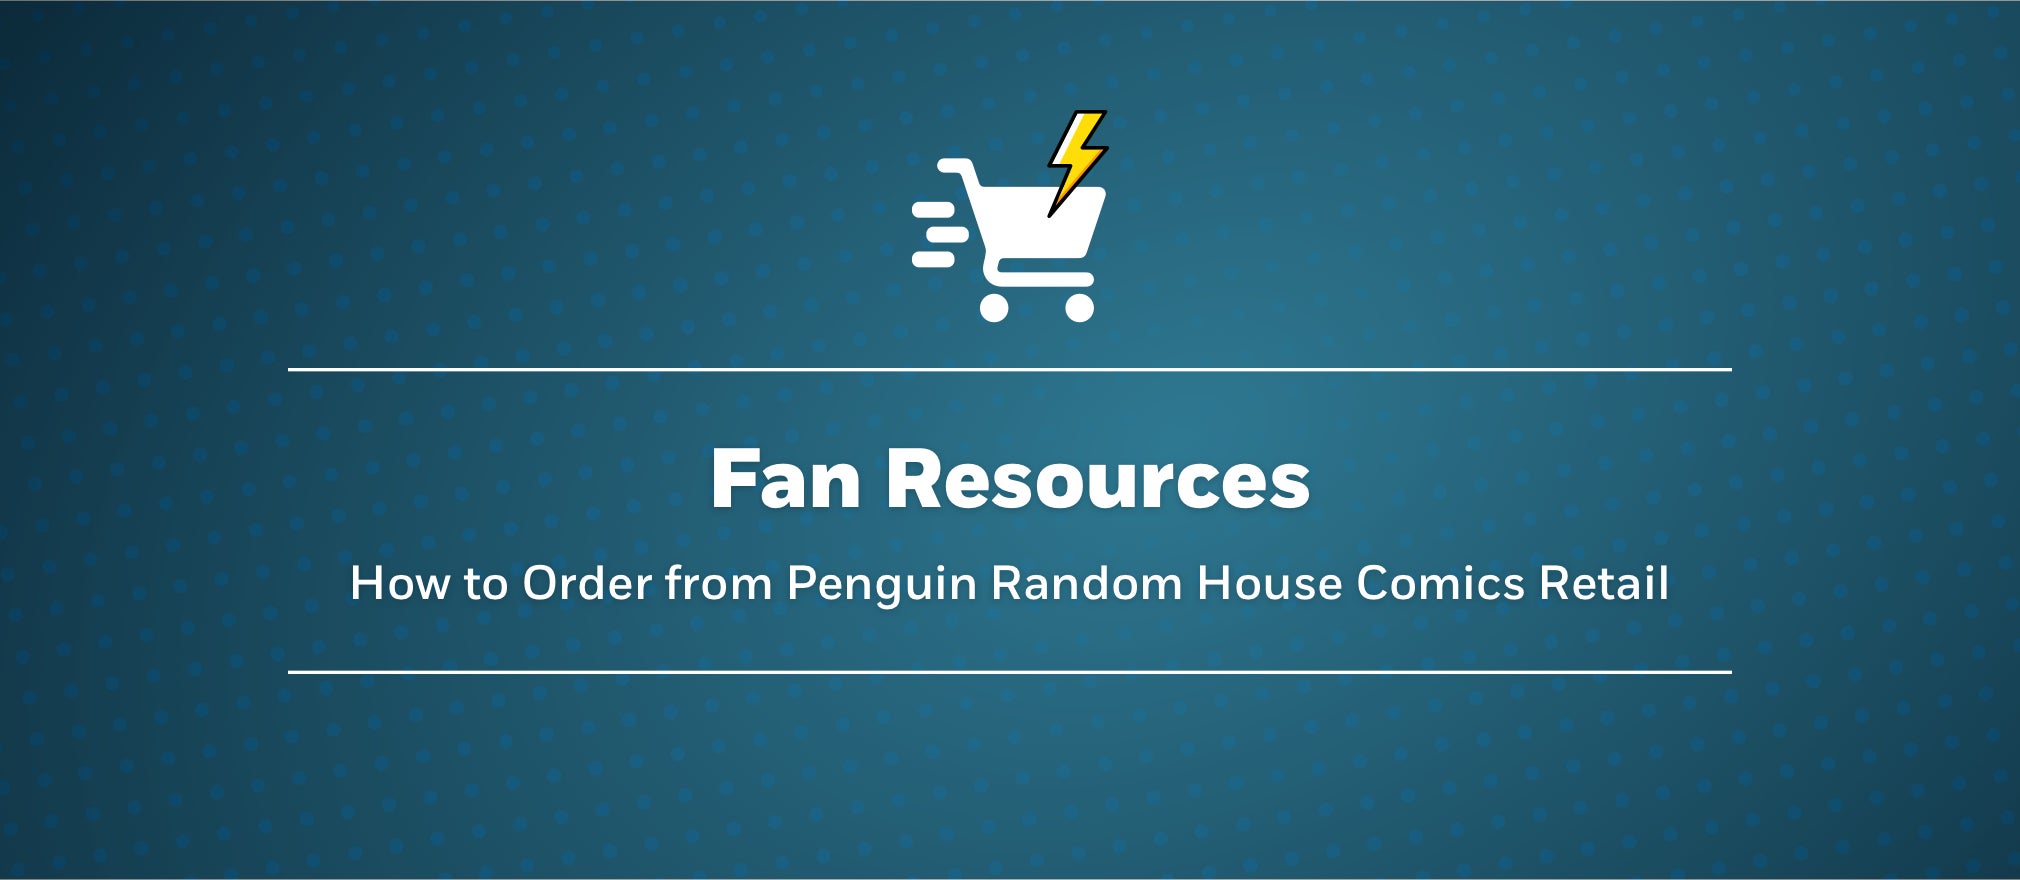 How to Order from Penguin Random House Comics Retail (for fans)